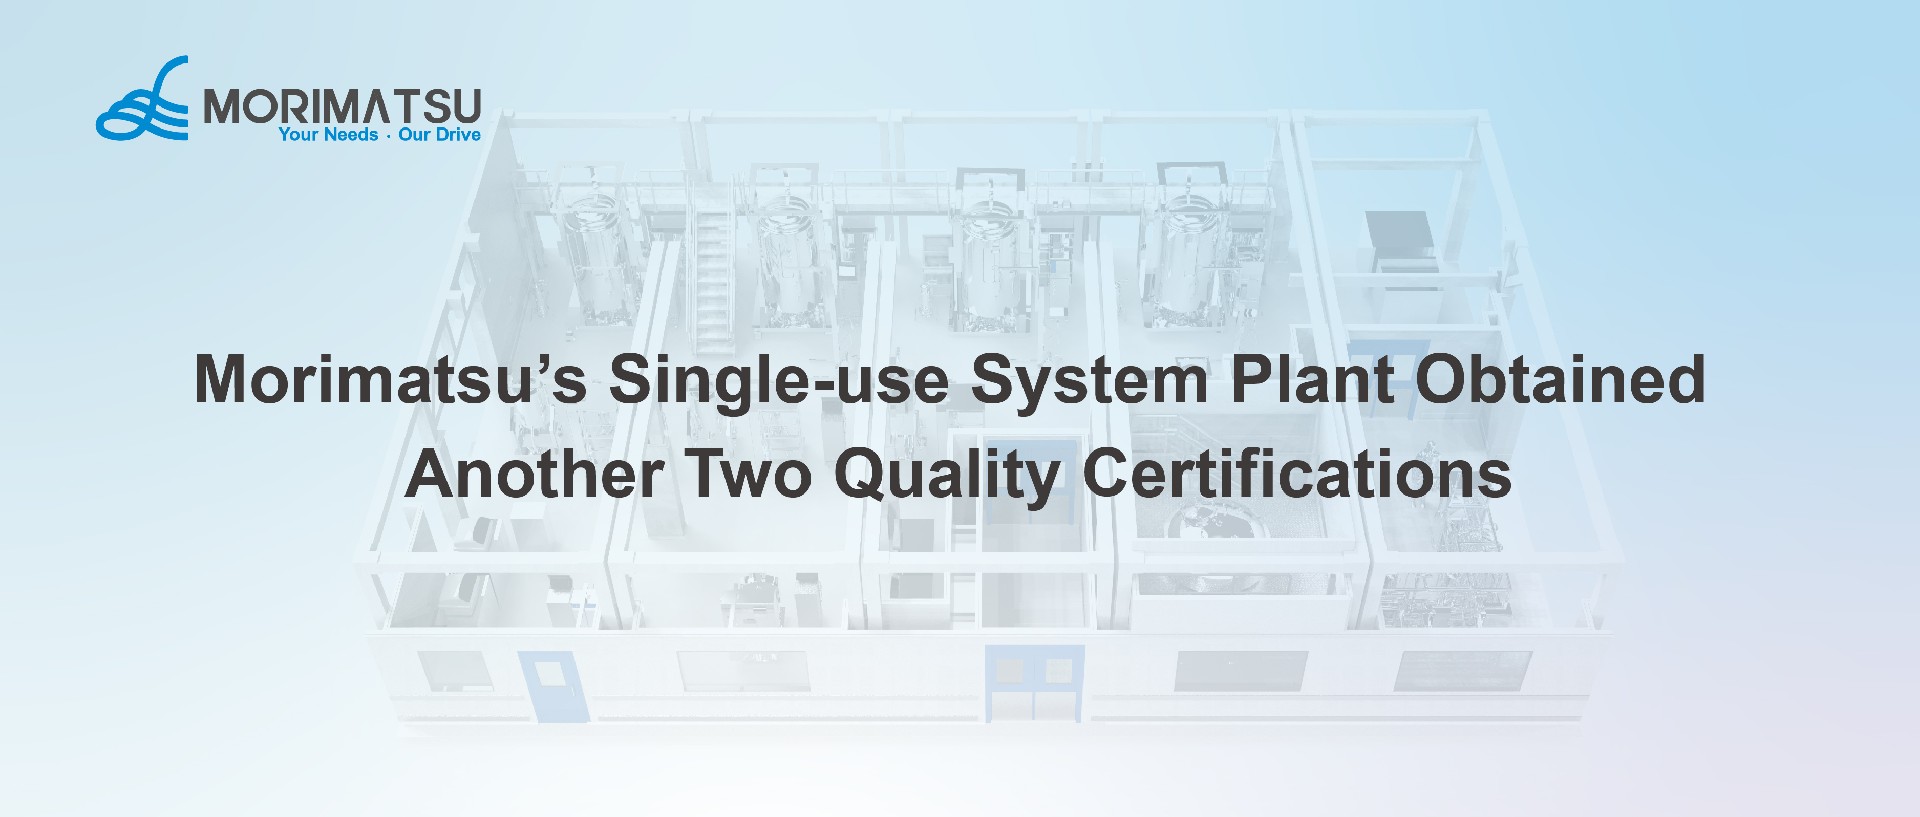 Morimatsu’s Single-use System Plant Obtained Another Two Quality Certifications